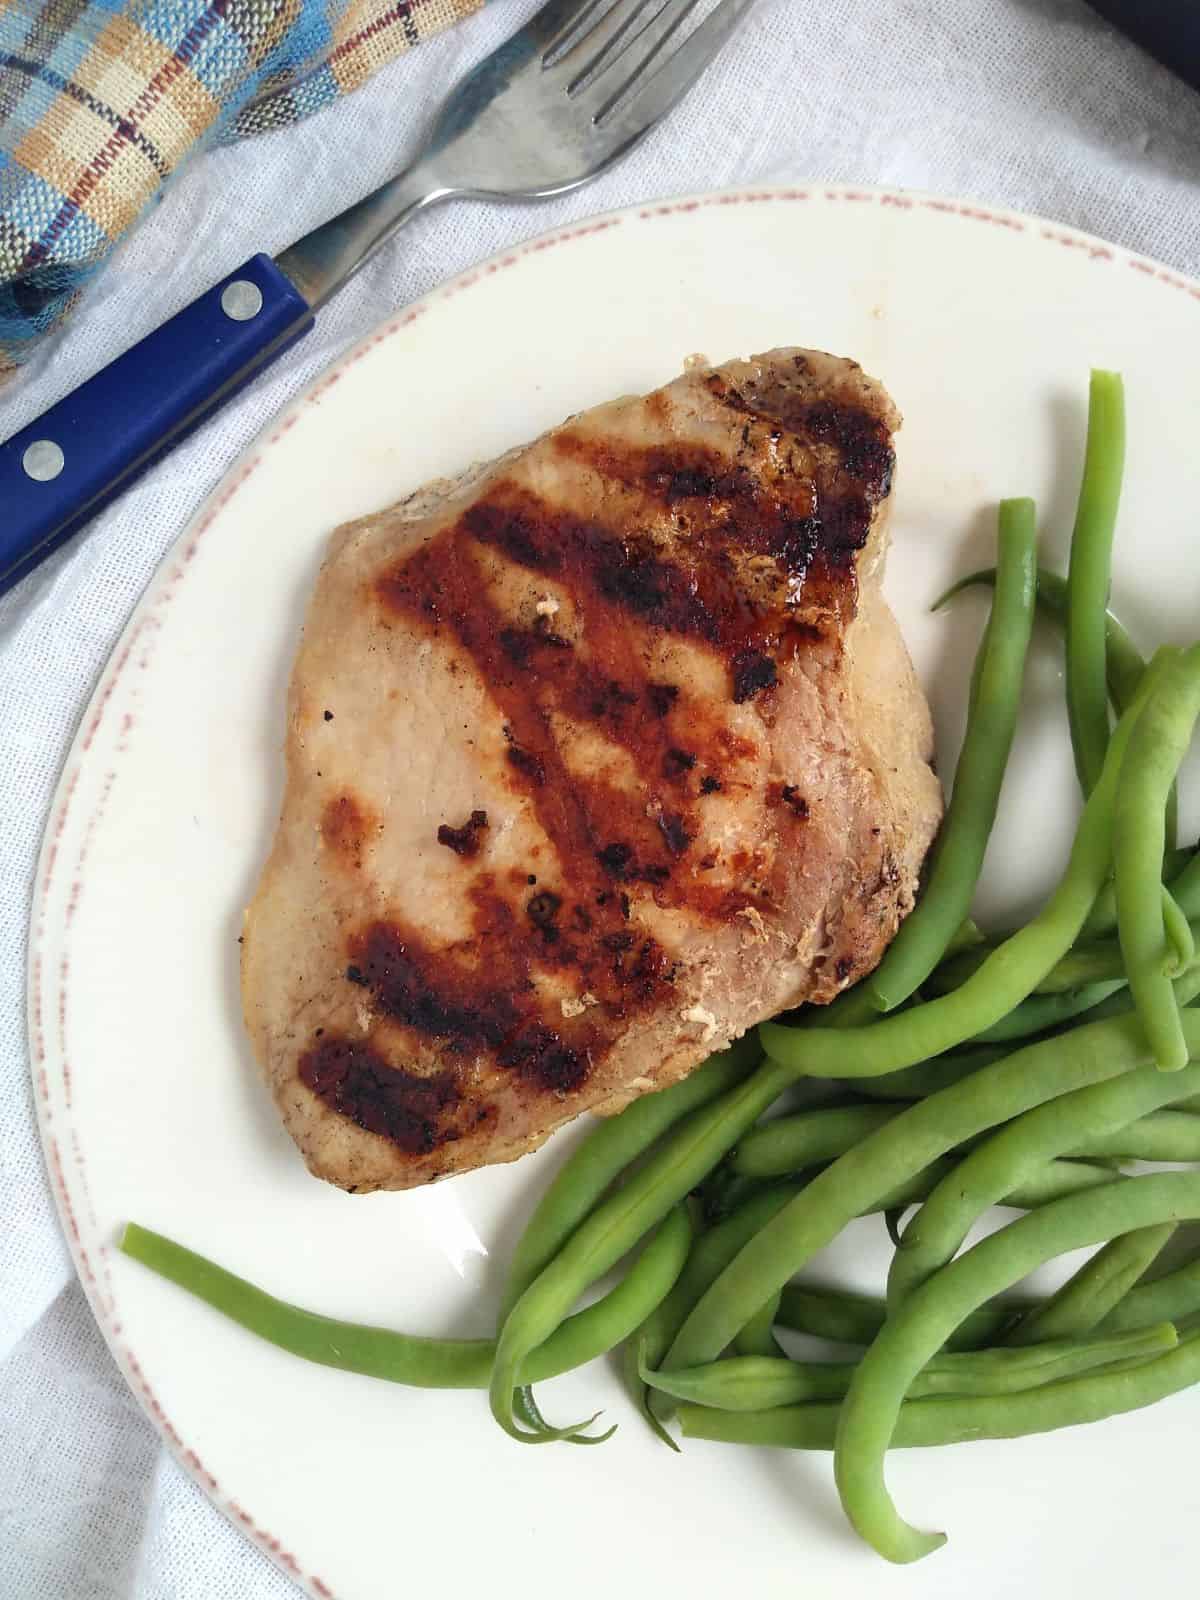 A grilled pork chop on a white plate with green beans. The plate is on a white towel with a blue/brown plaid towel on top and a blue handled fork